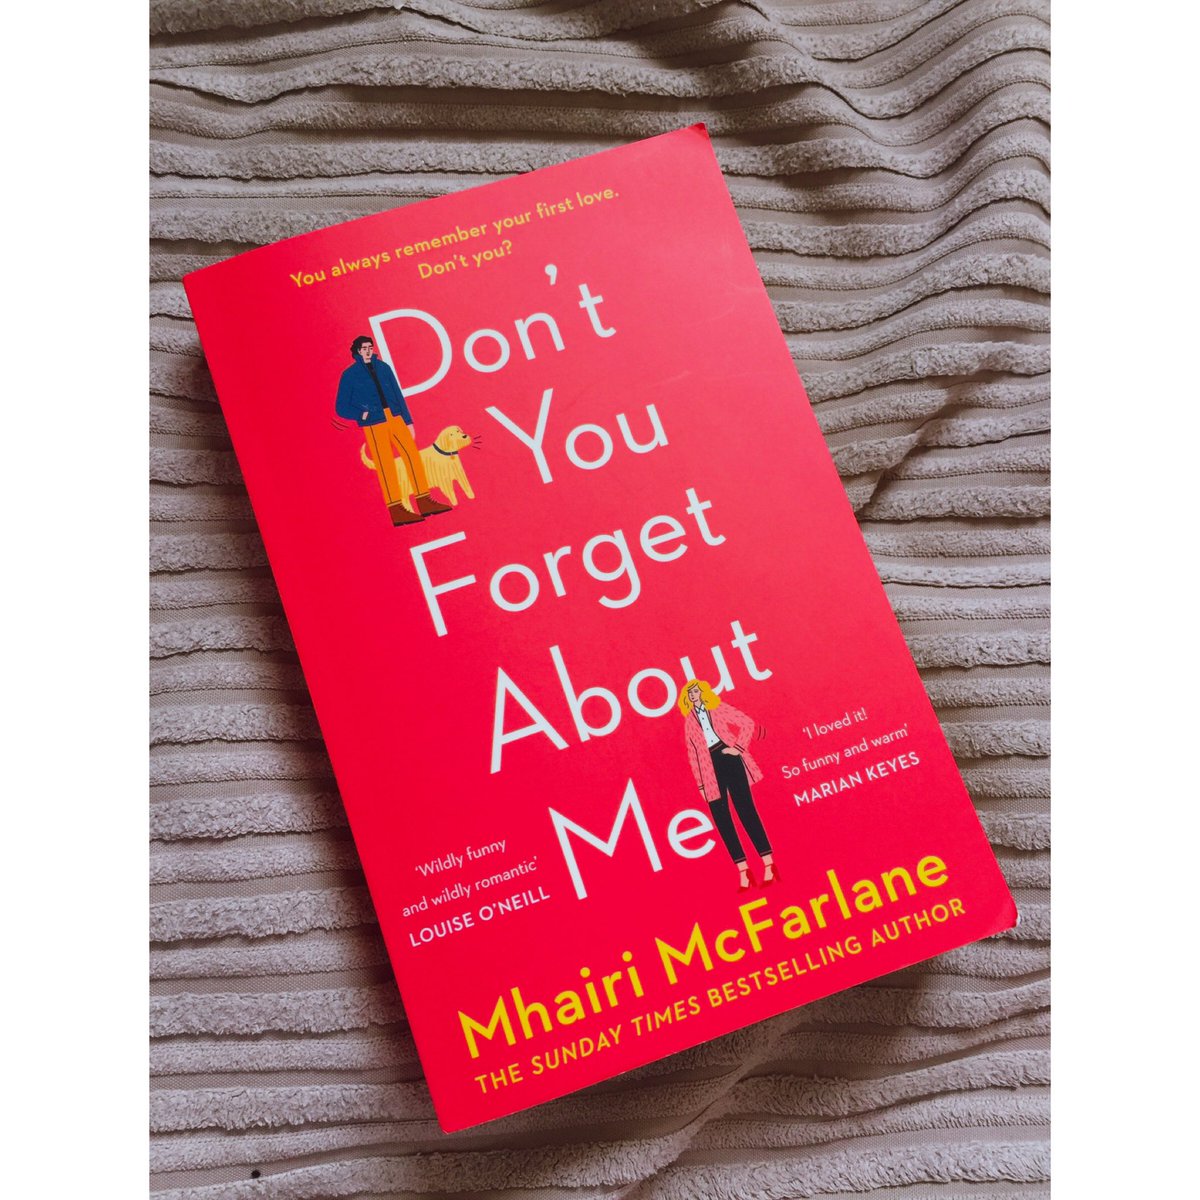 Just finished reading my 4th book of the year - Don’t You Forget About Me by @MhairiMcF! Loved this story and really found myself routing for Georgina all the way through. I laughed, cried and enjoyed every word of it. Brilliant book ❤️✨ #reading #books #QuarantineBooks